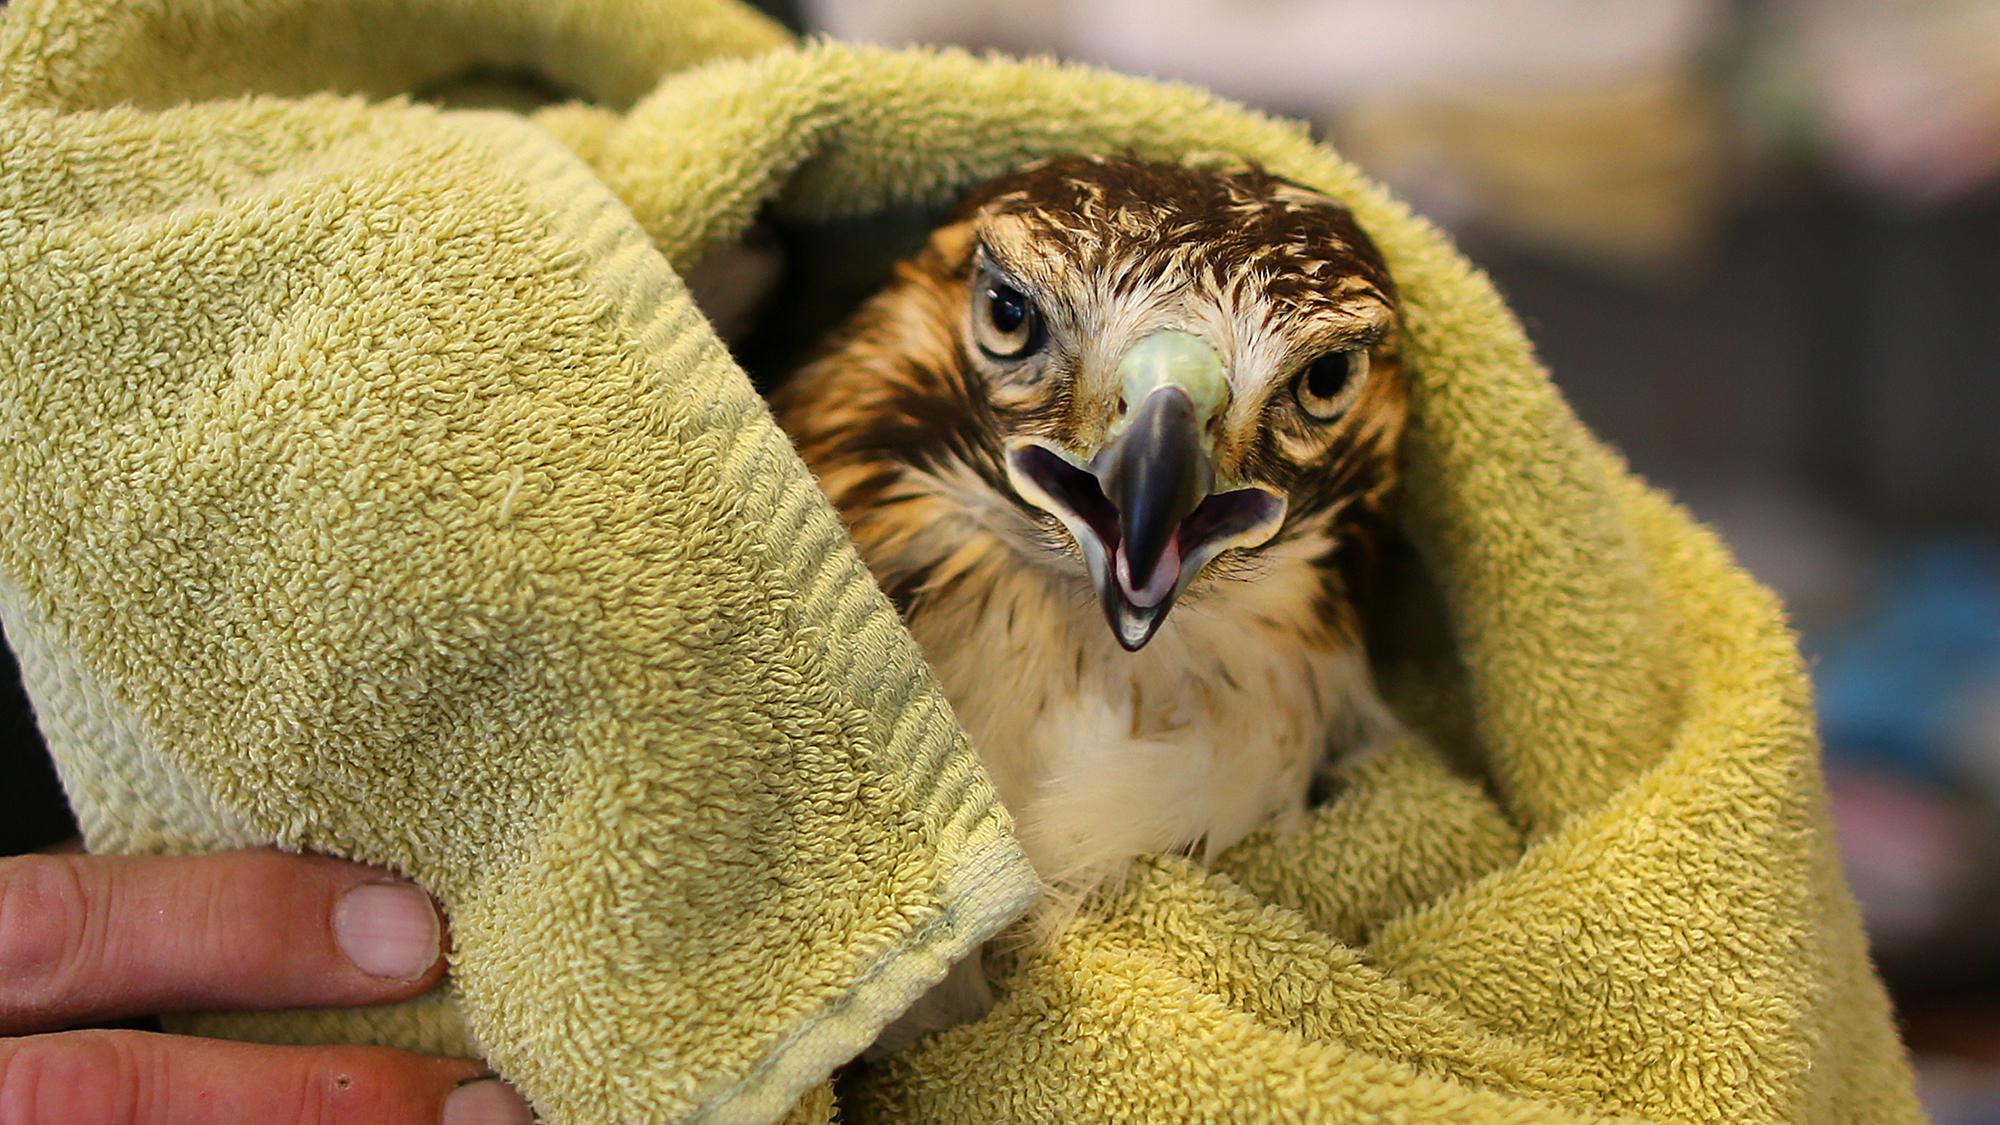 A red-tailed hawk with a broken wing at the New England Wildlife Center in Weymouth, Mass.